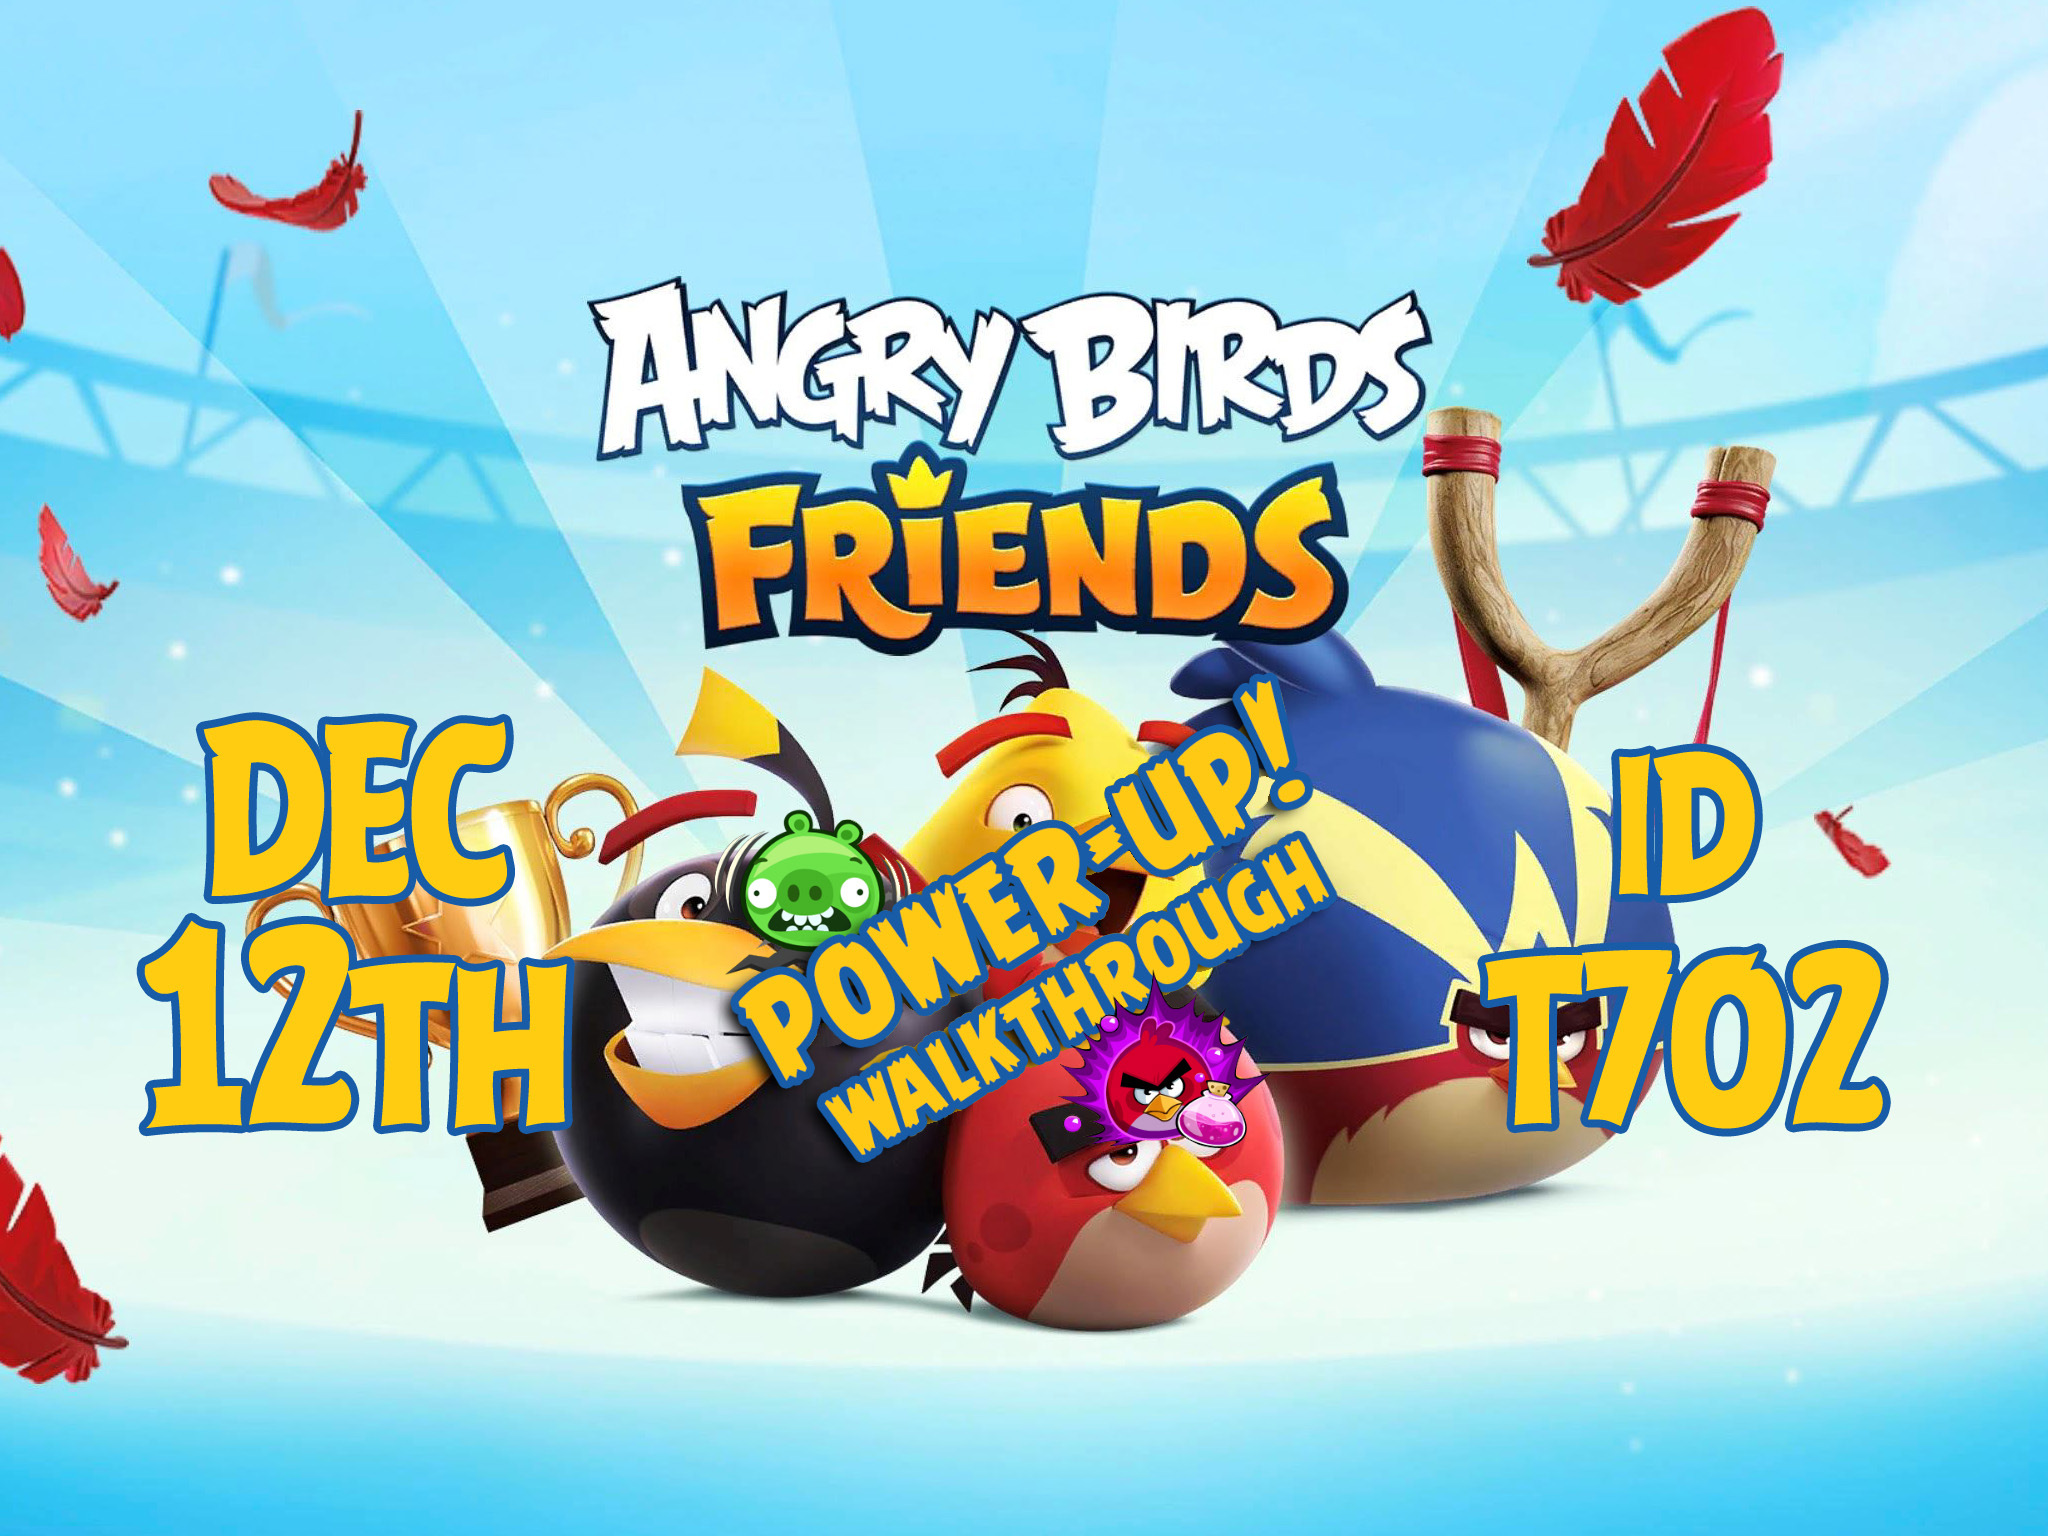 Angry-Birds-Friends-Tournament-T702-Feature-Image-PU